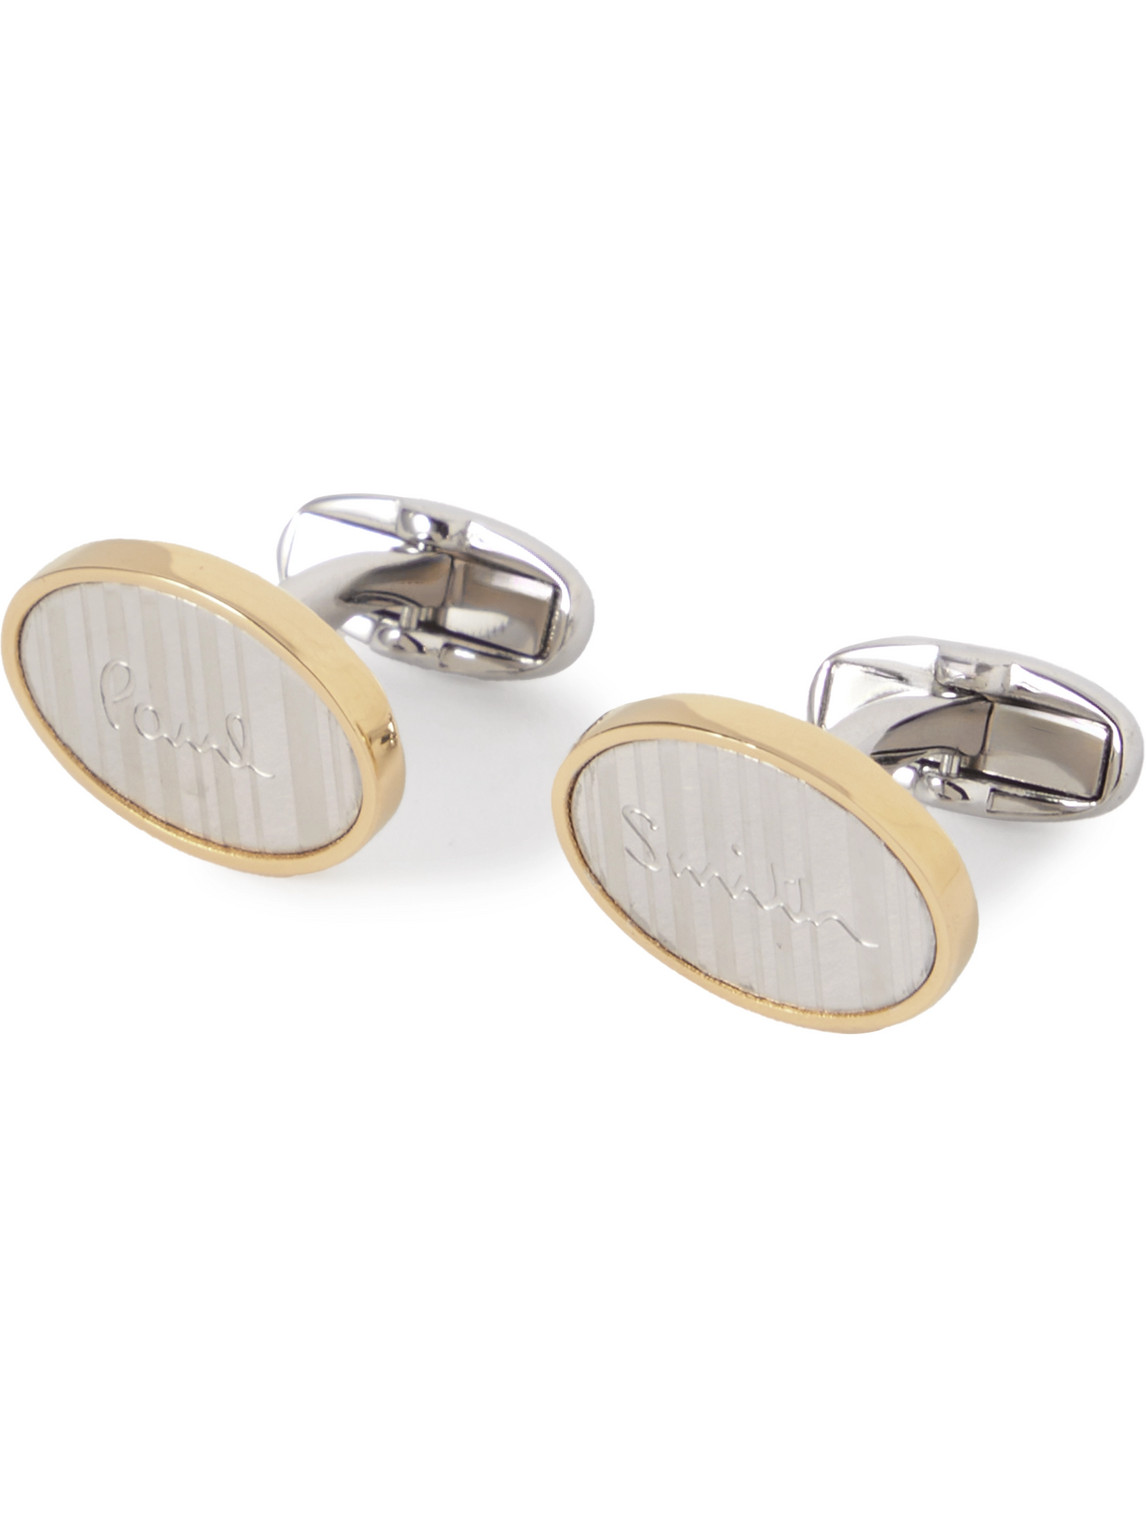 PAUL SMITH GOLD- AND SILVER-TONE CUFFLINKS